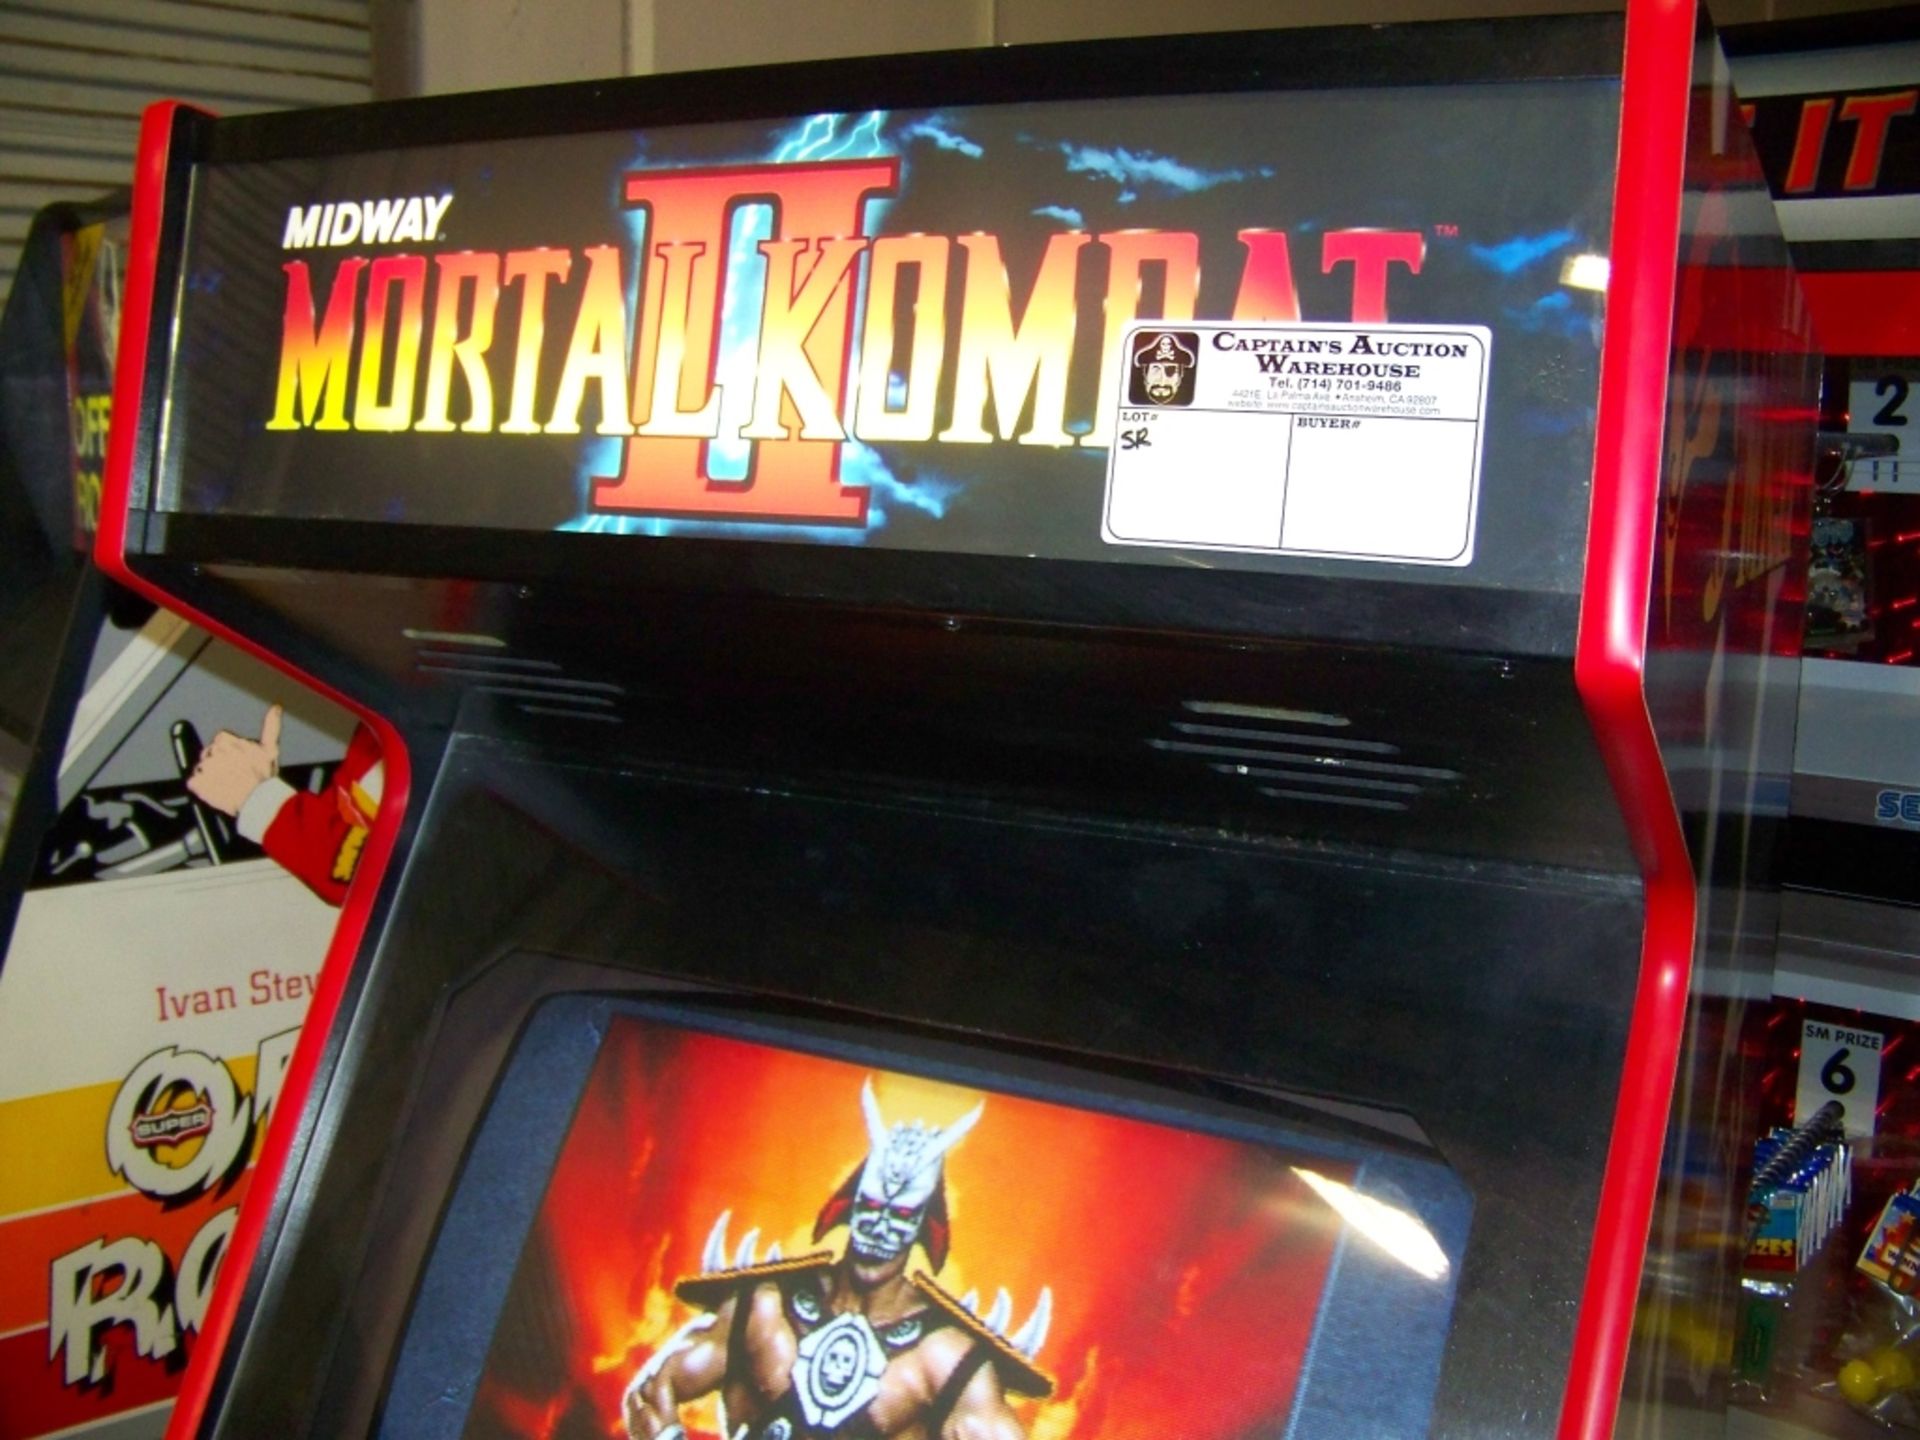 MORTAL KOMBAT II ARCADE GAME MIDWAY Item is in used condition. Evidence of wear and commercial - Image 4 of 8